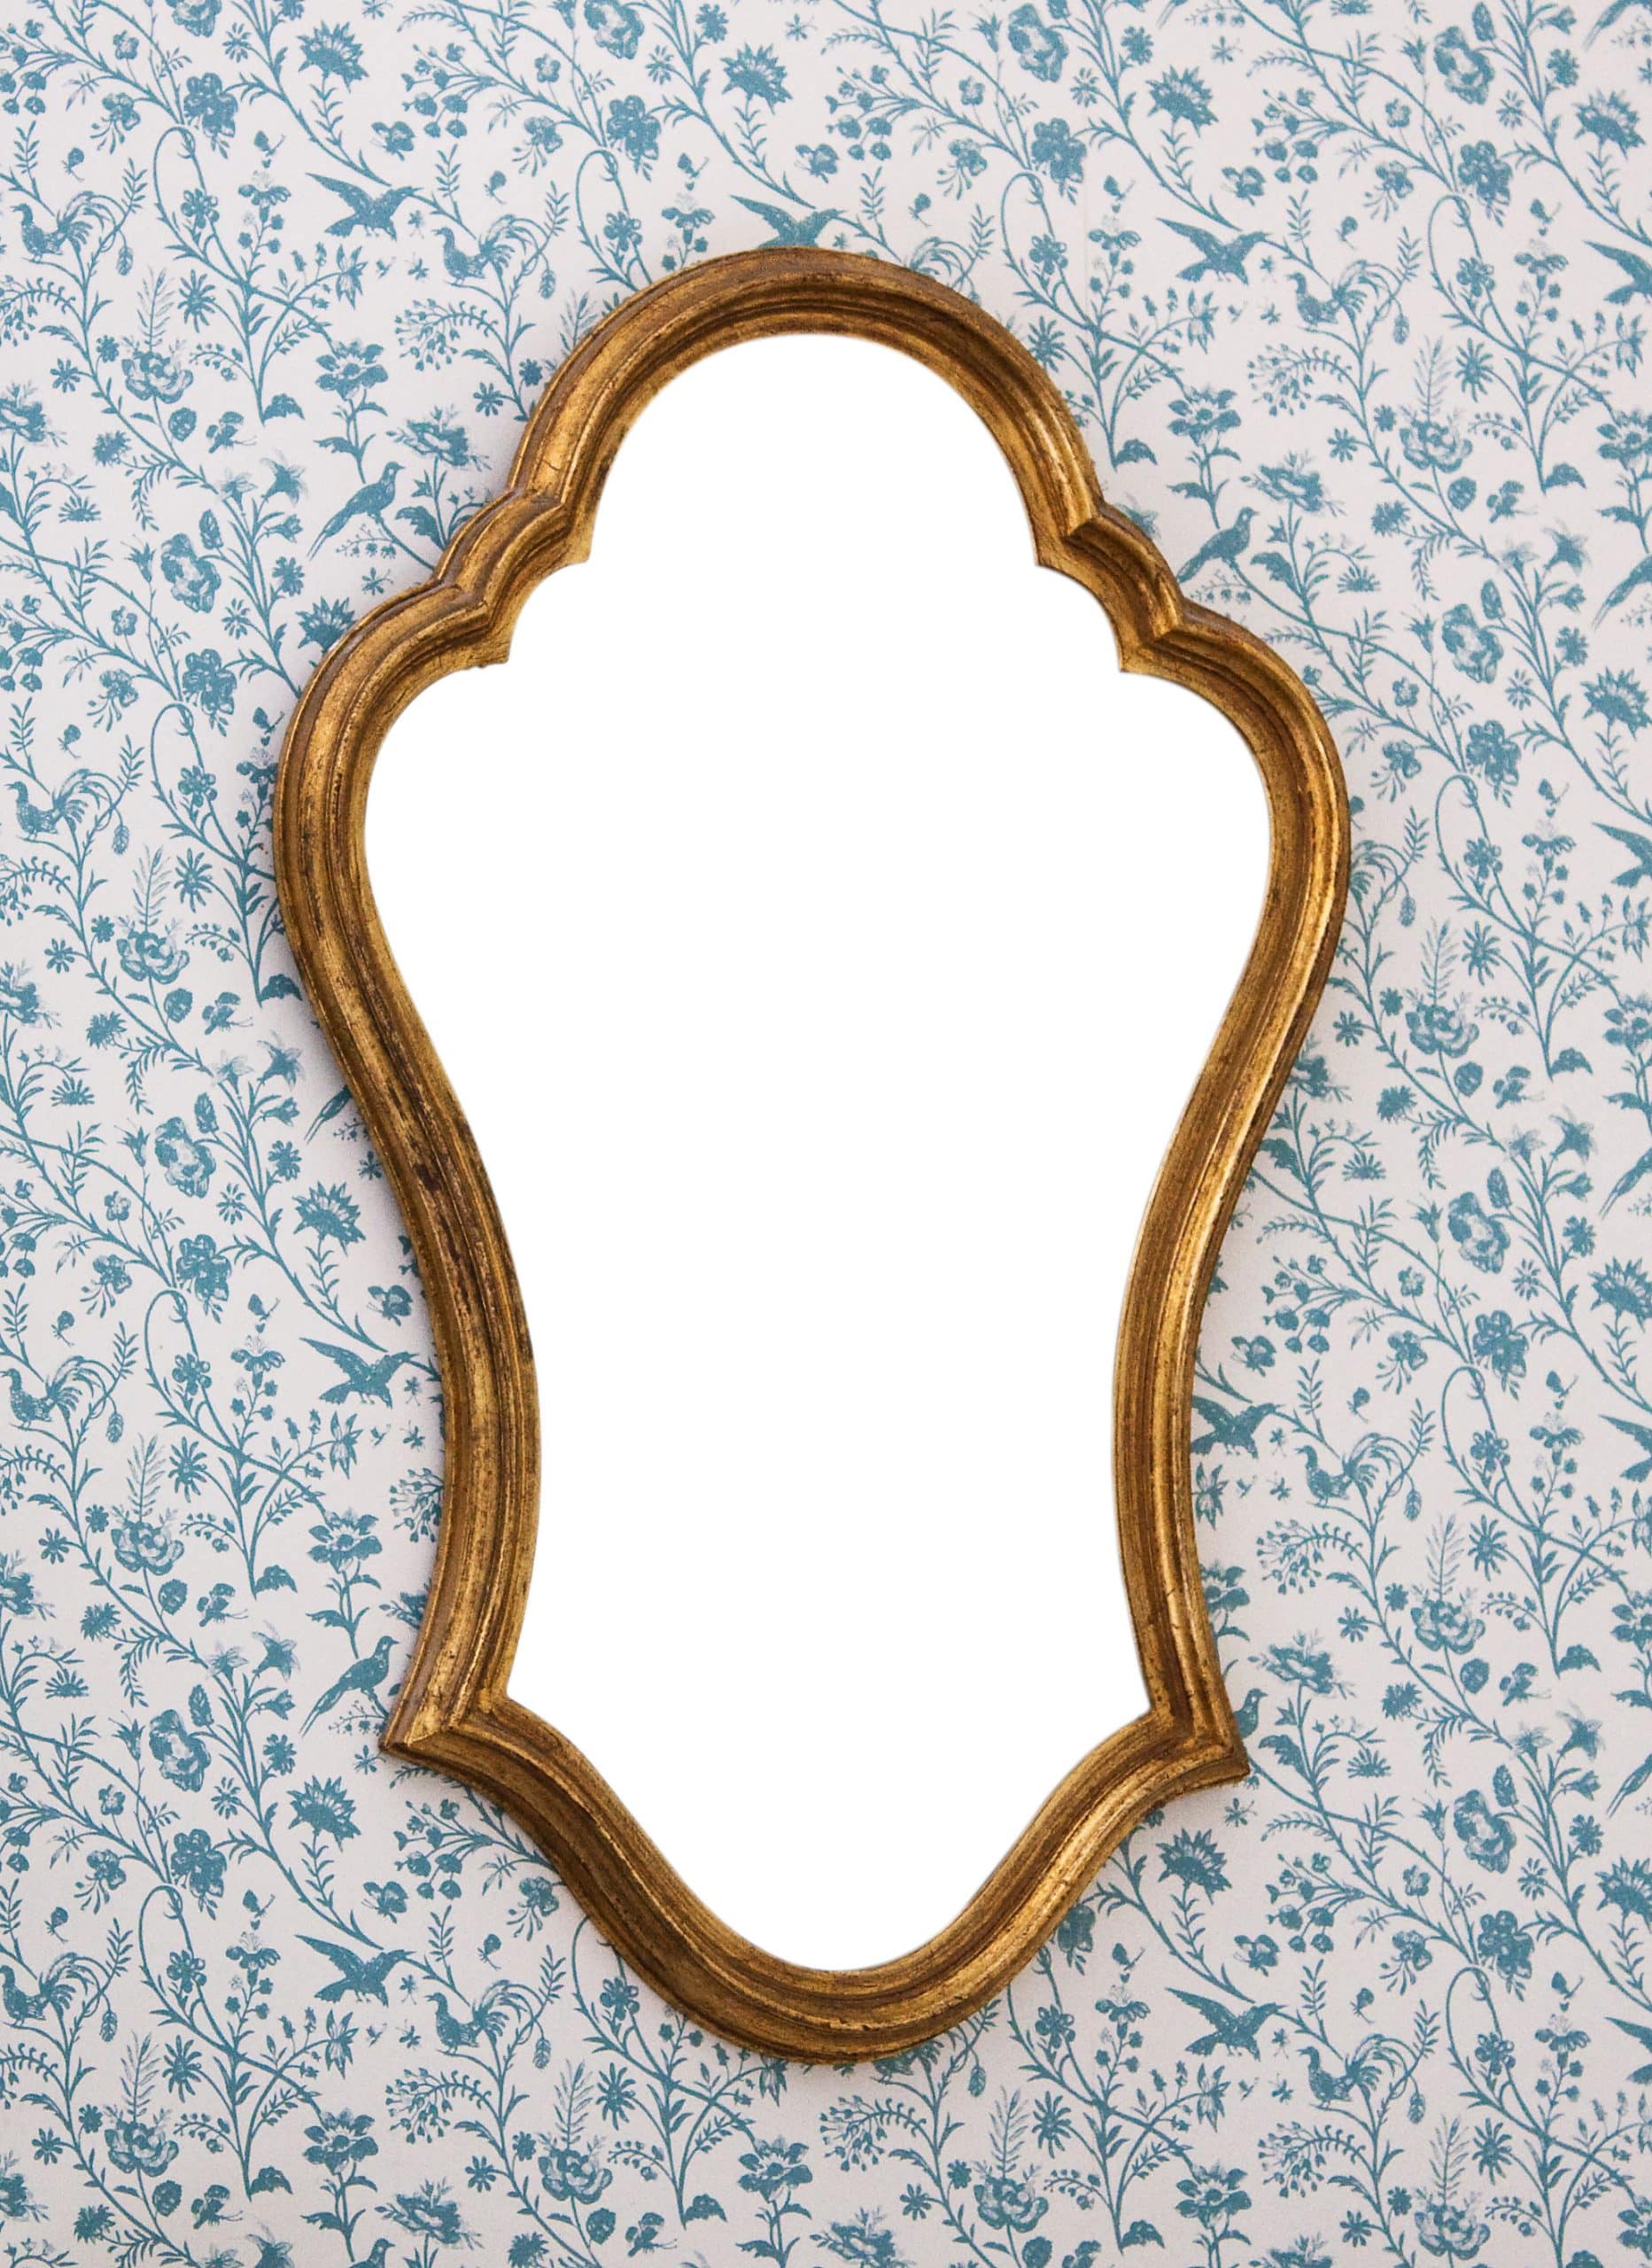 mirror hanging on floral wallpaper